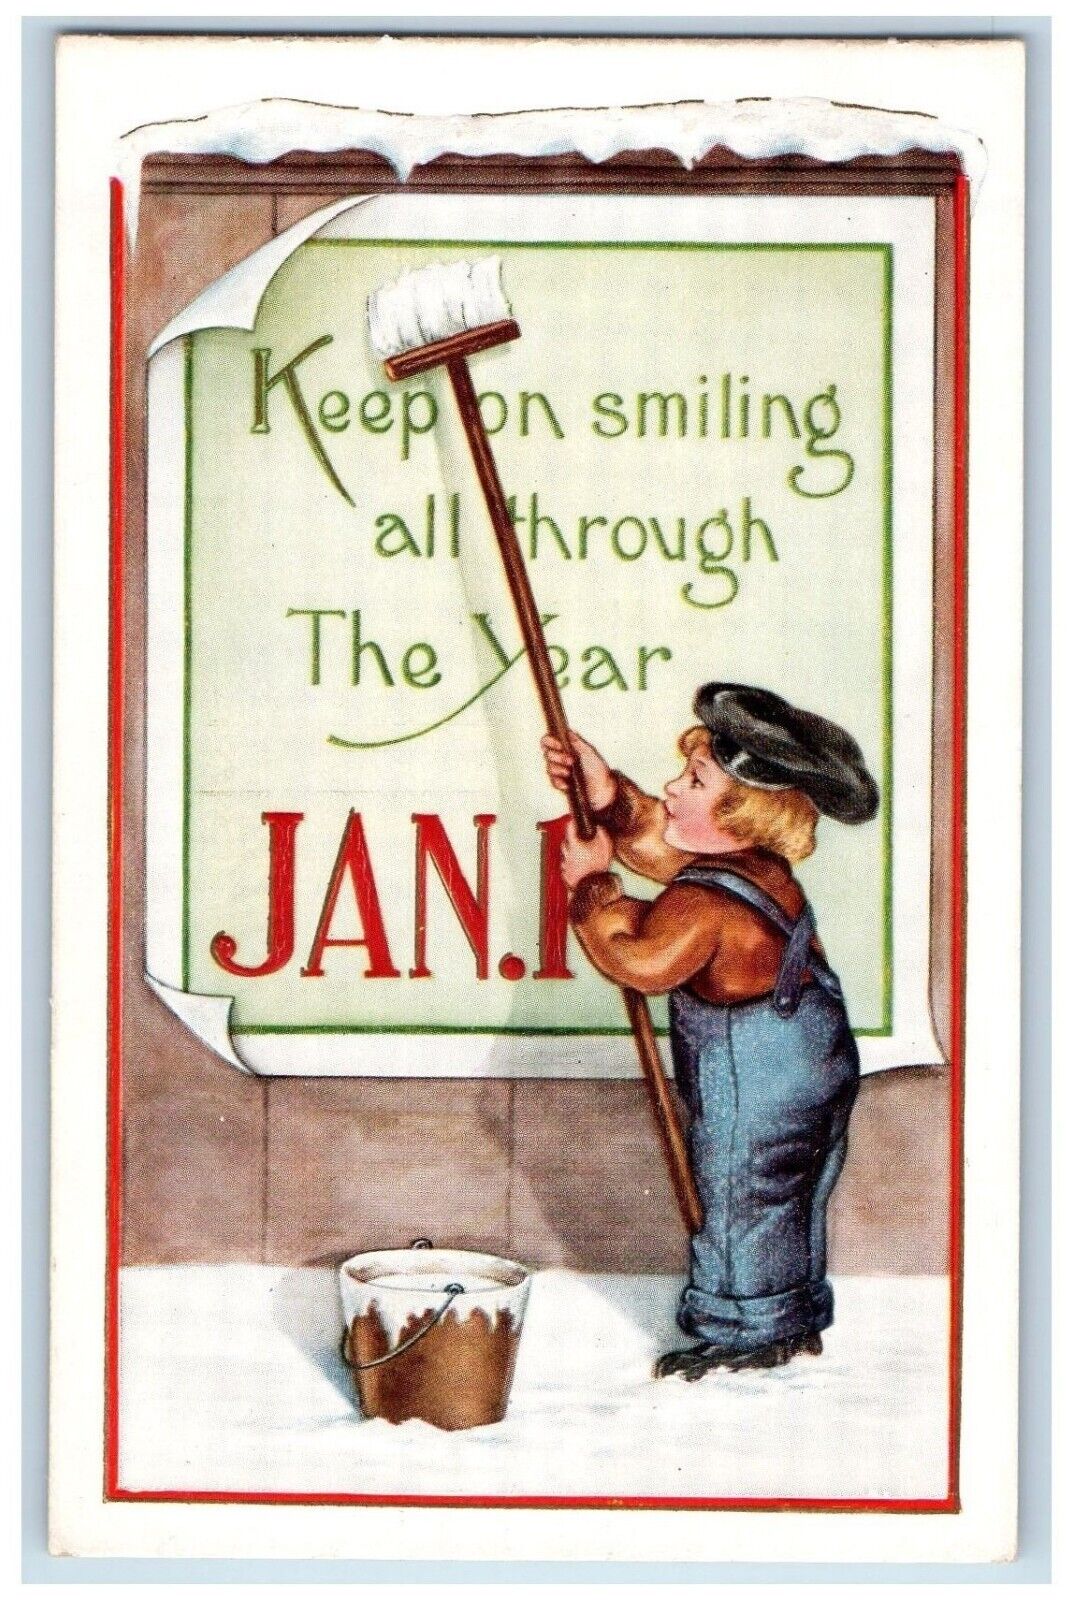 c1910's New Year Jan. 1 Boy Cleaning Winter Snow Embossed Antique Postcard